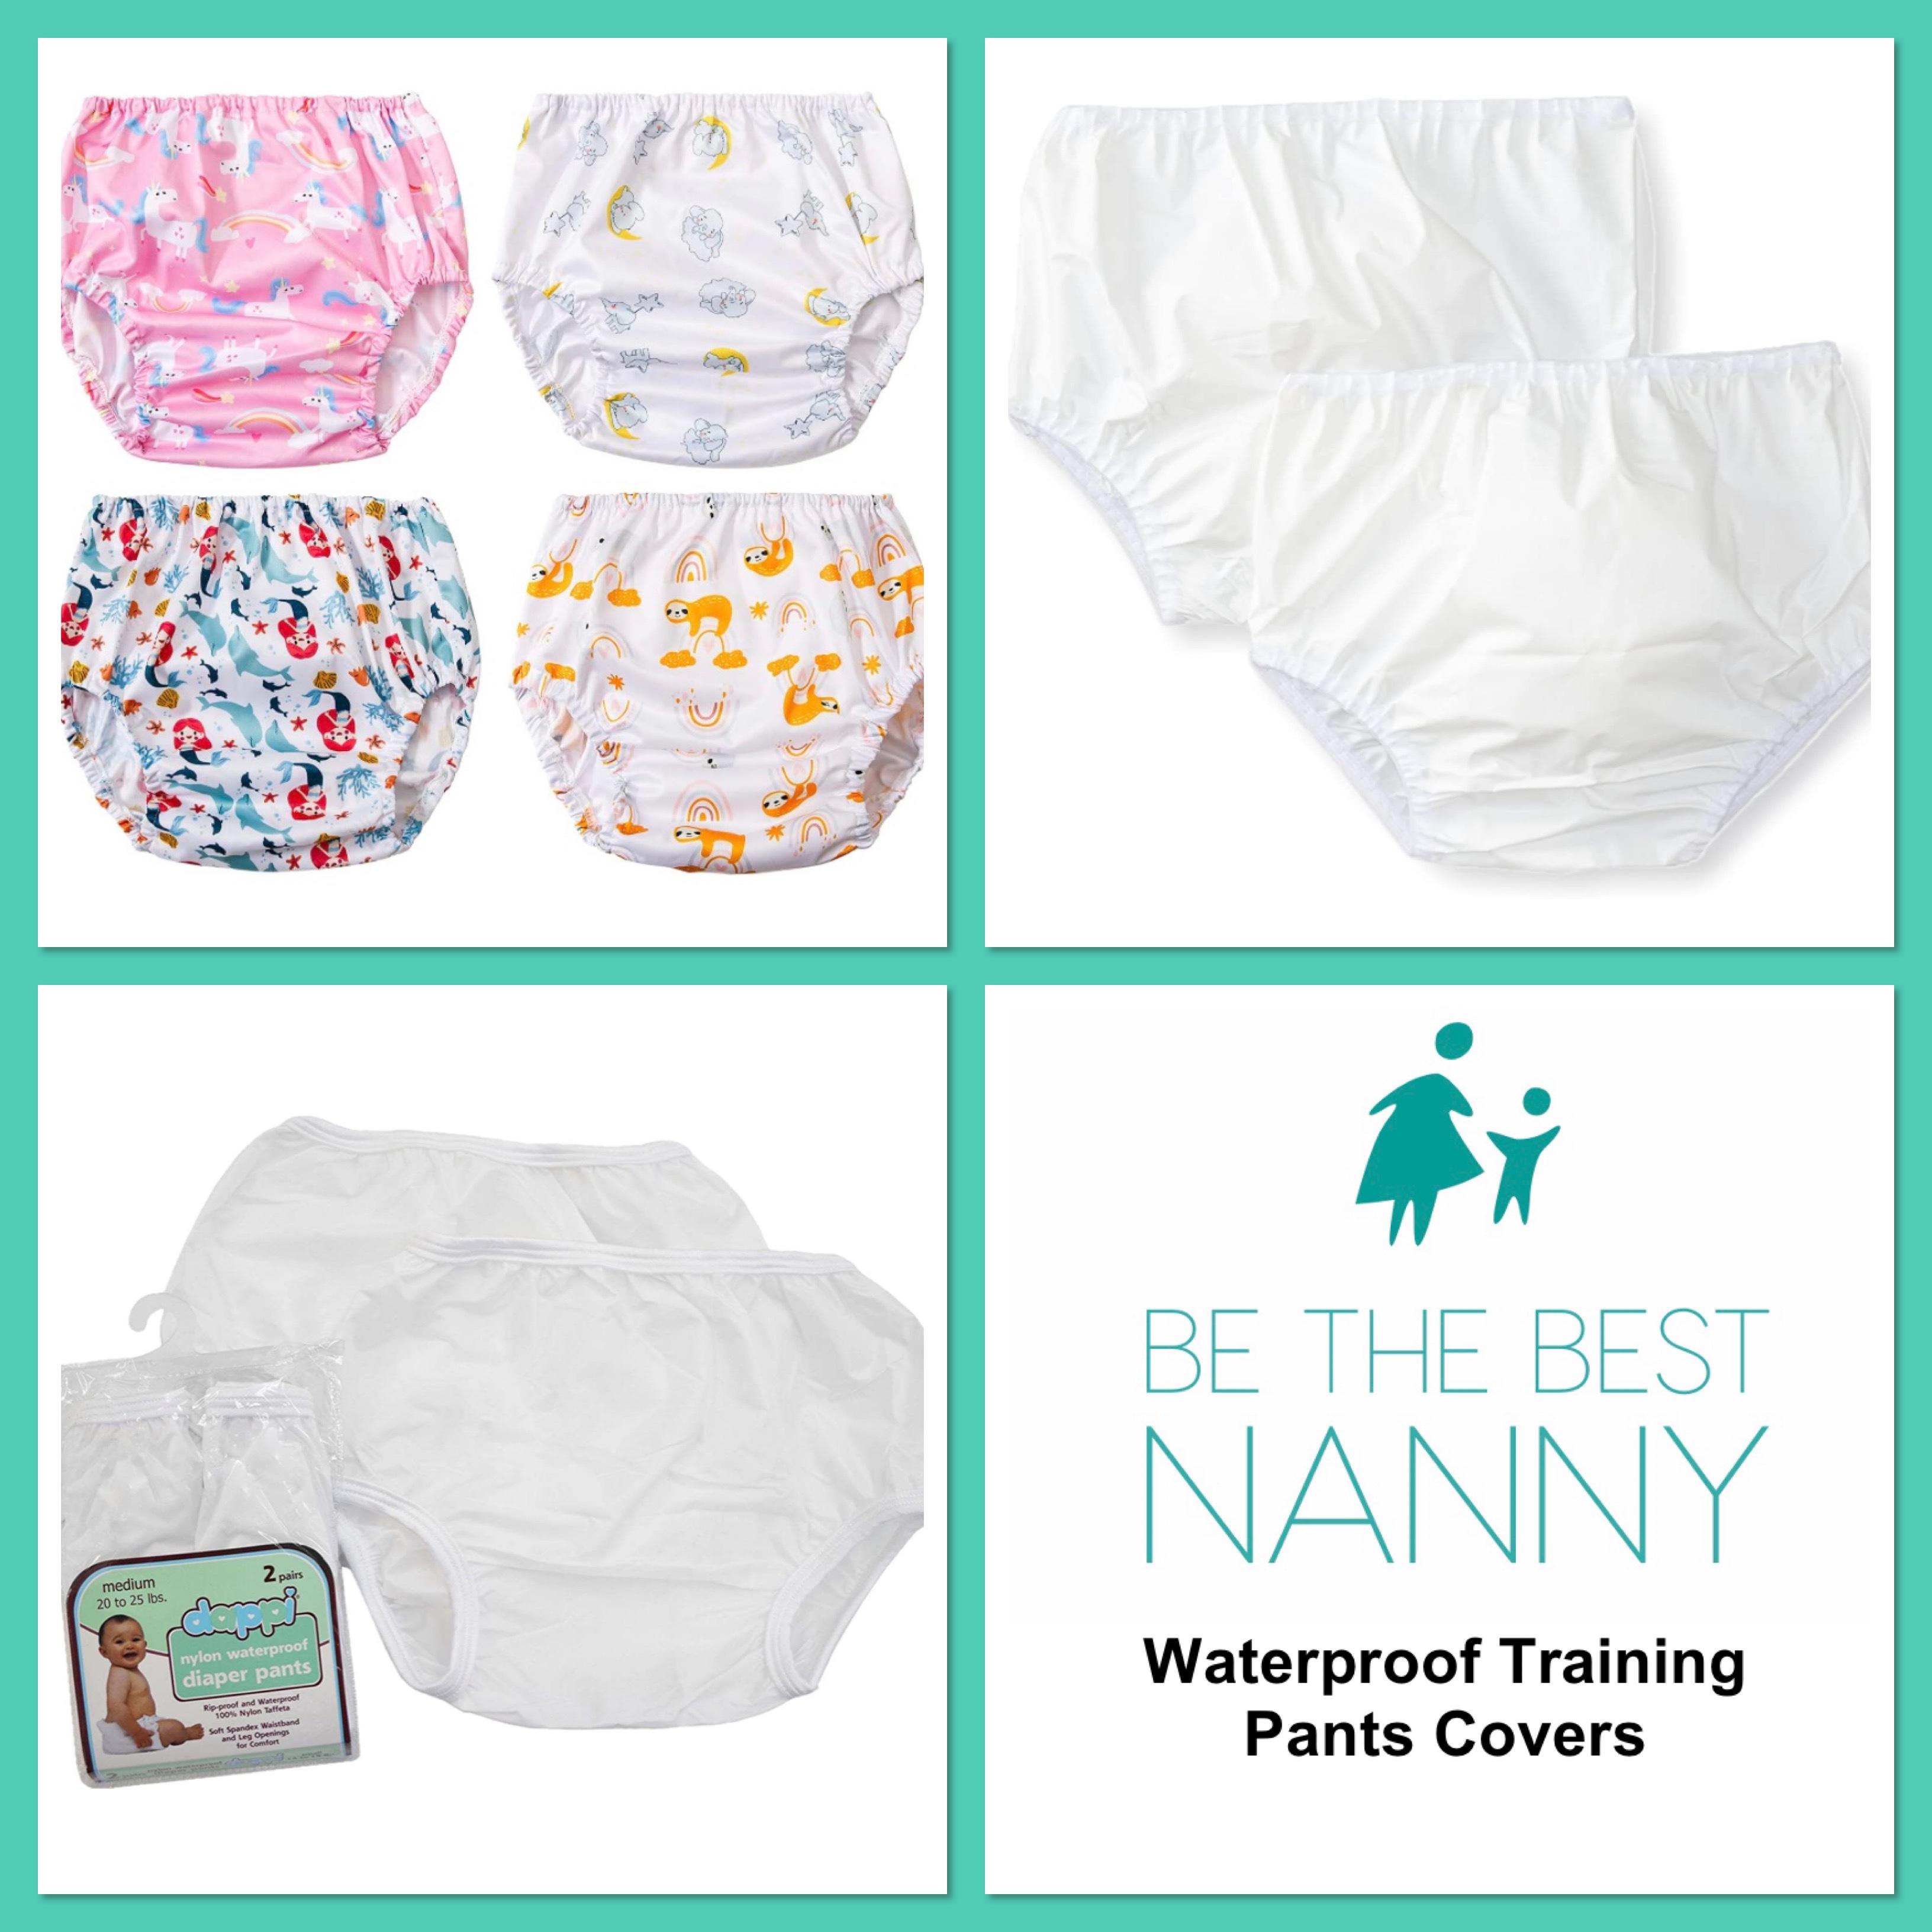 Don't Use Pull-Ups: Use Underwear and Waterproof Potty Training Covers to Potty  Train